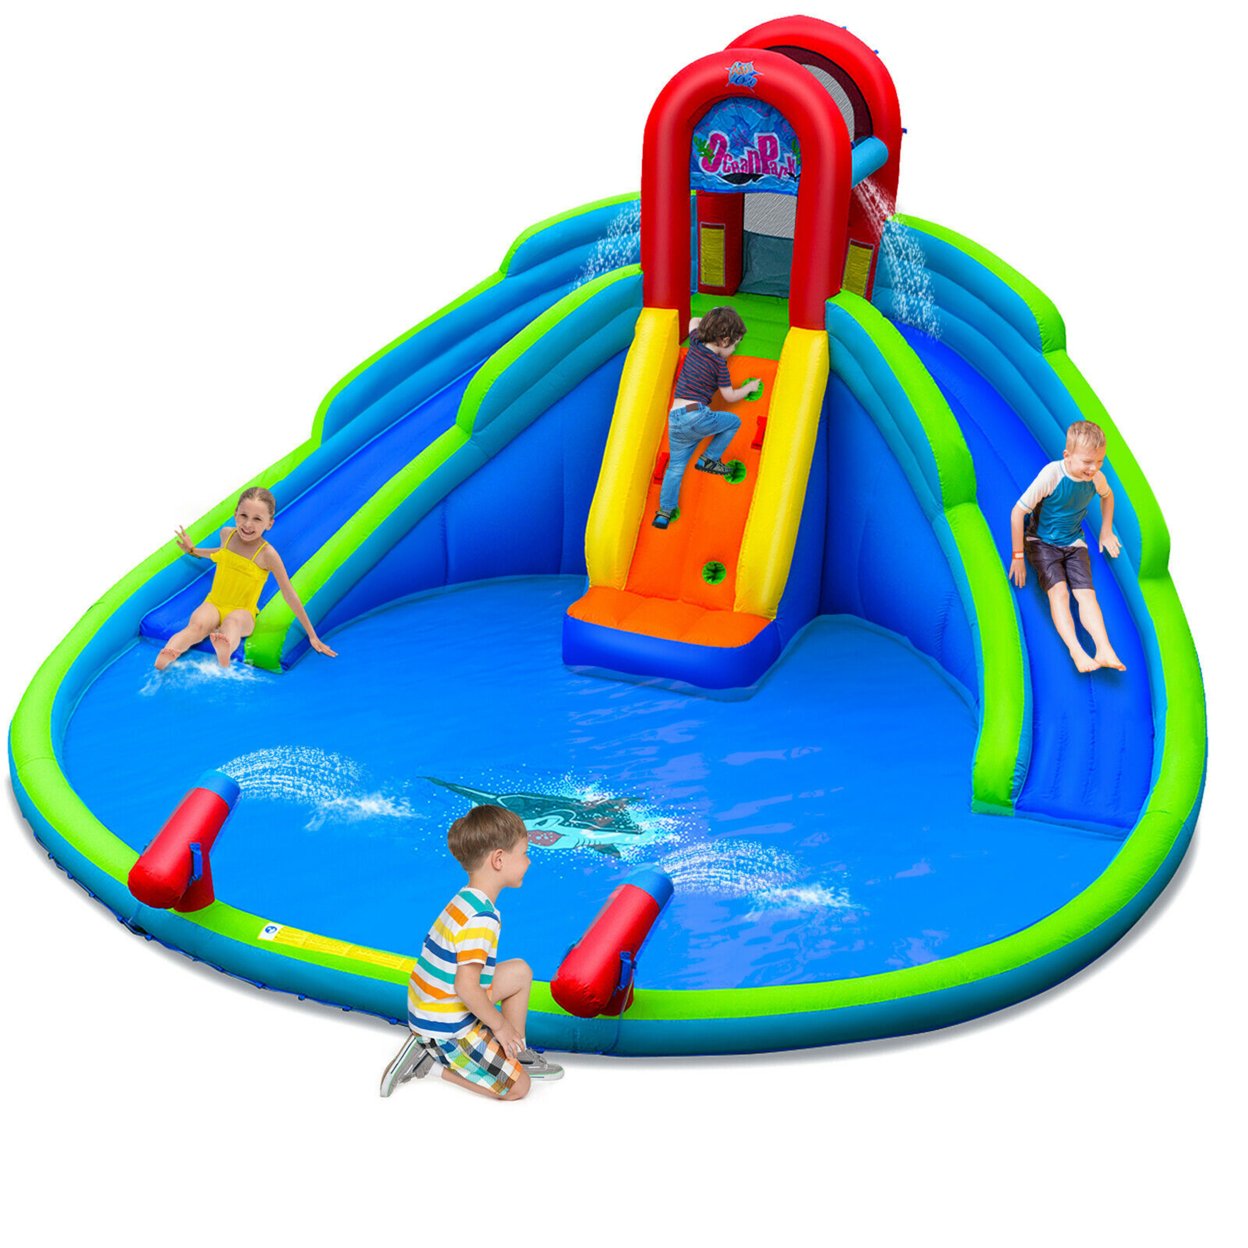 Inflatable Waterslide Wet & Dry Bounce House W/Upgraded Handrail Blower Excluded